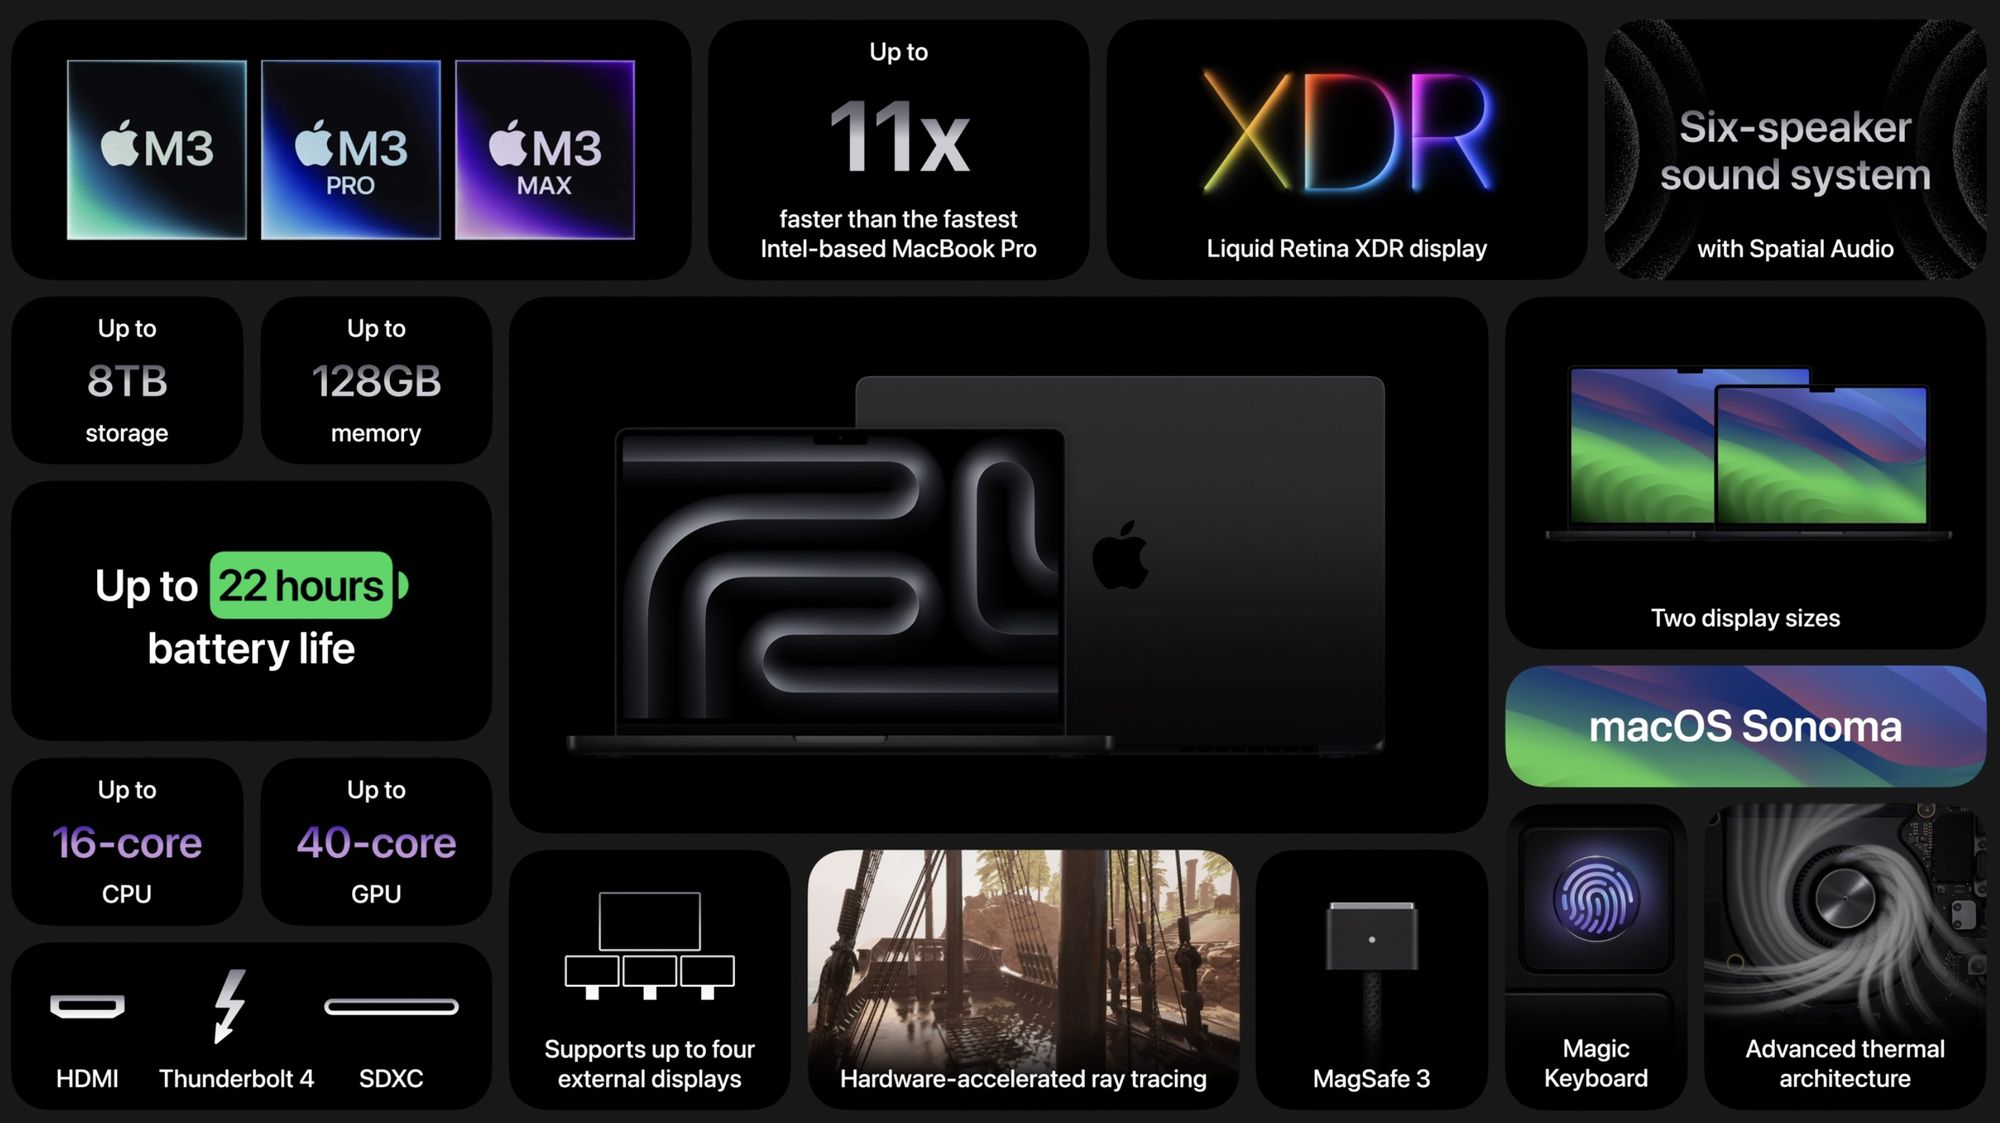 Features of the new MacBook Pro 